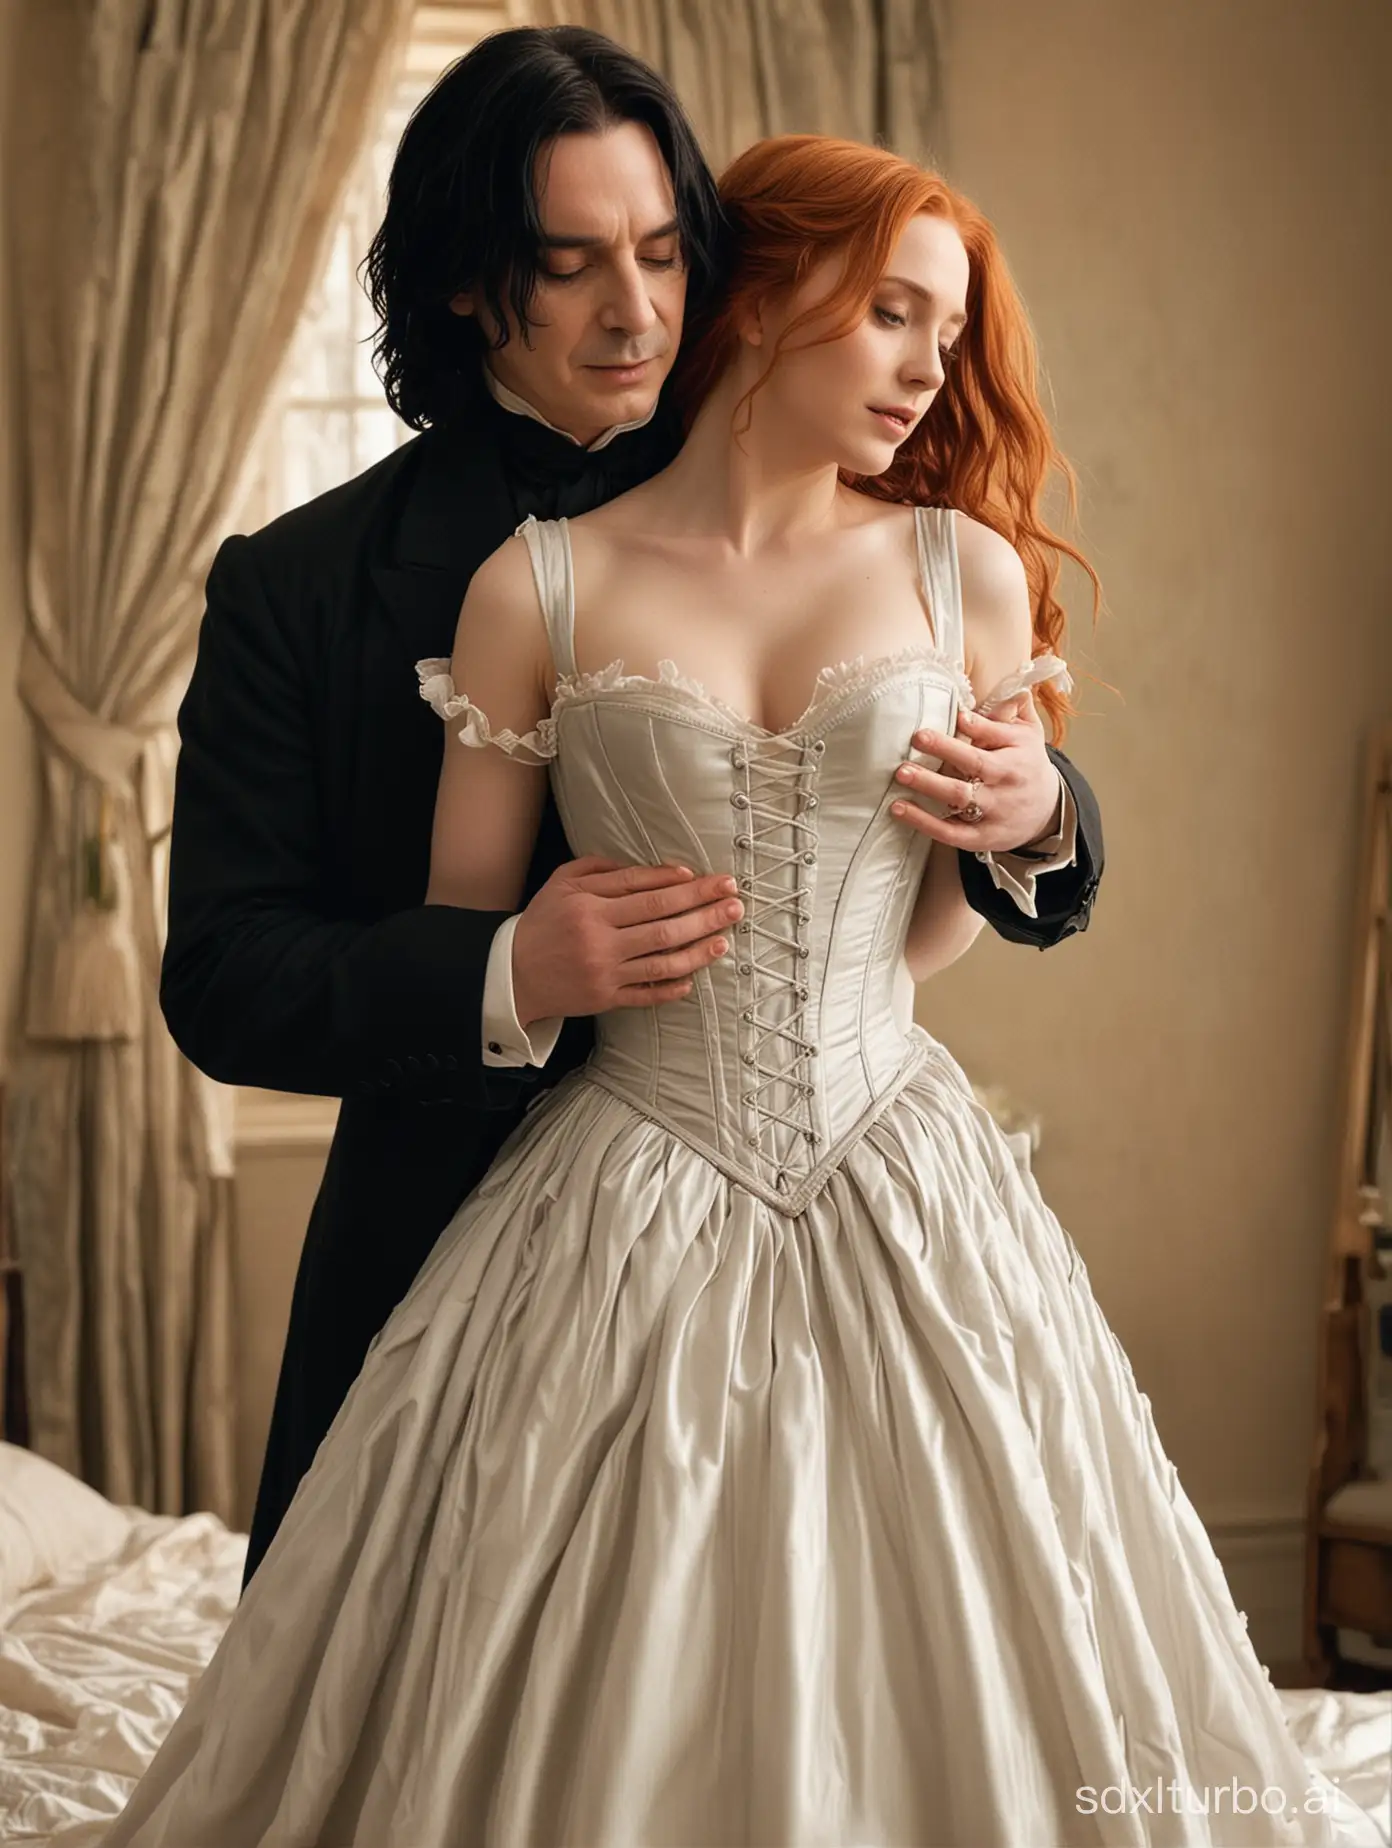 Severus-Snape-and-Lily-Evans-Intimate-Moment-in-Bedroom